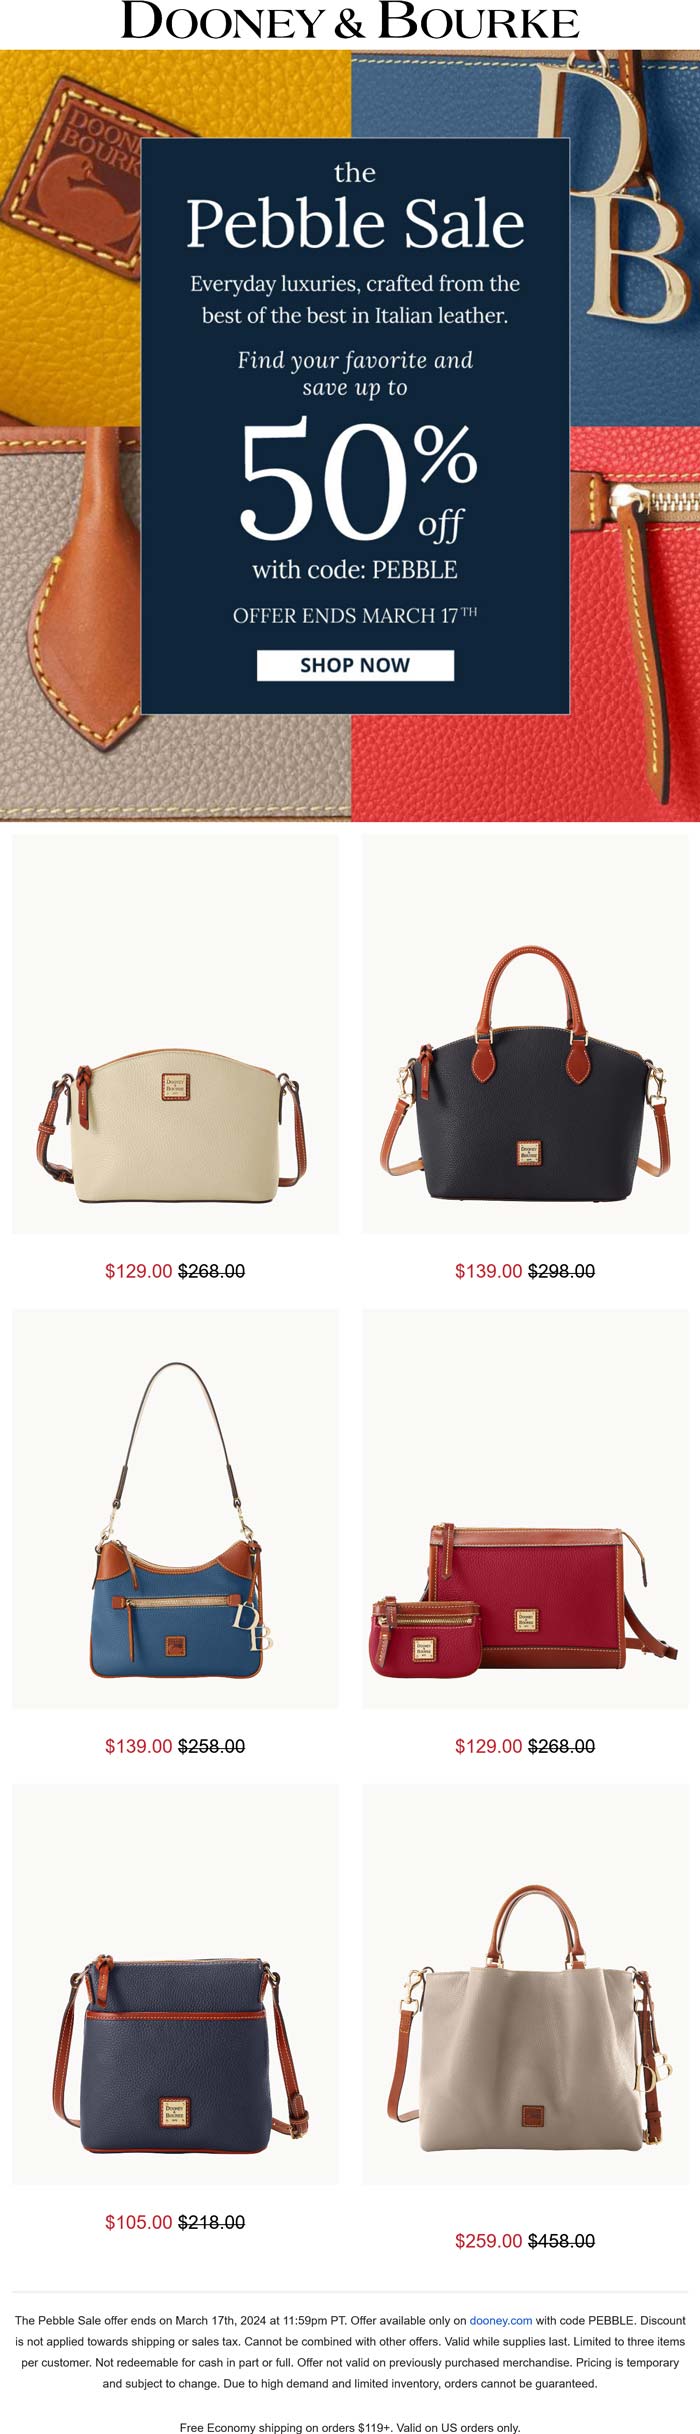 Dooney & Bourke stores Coupon  50% off pebble bags at Dooney & Bourke via promo code PEBBLE #dooneybourke 